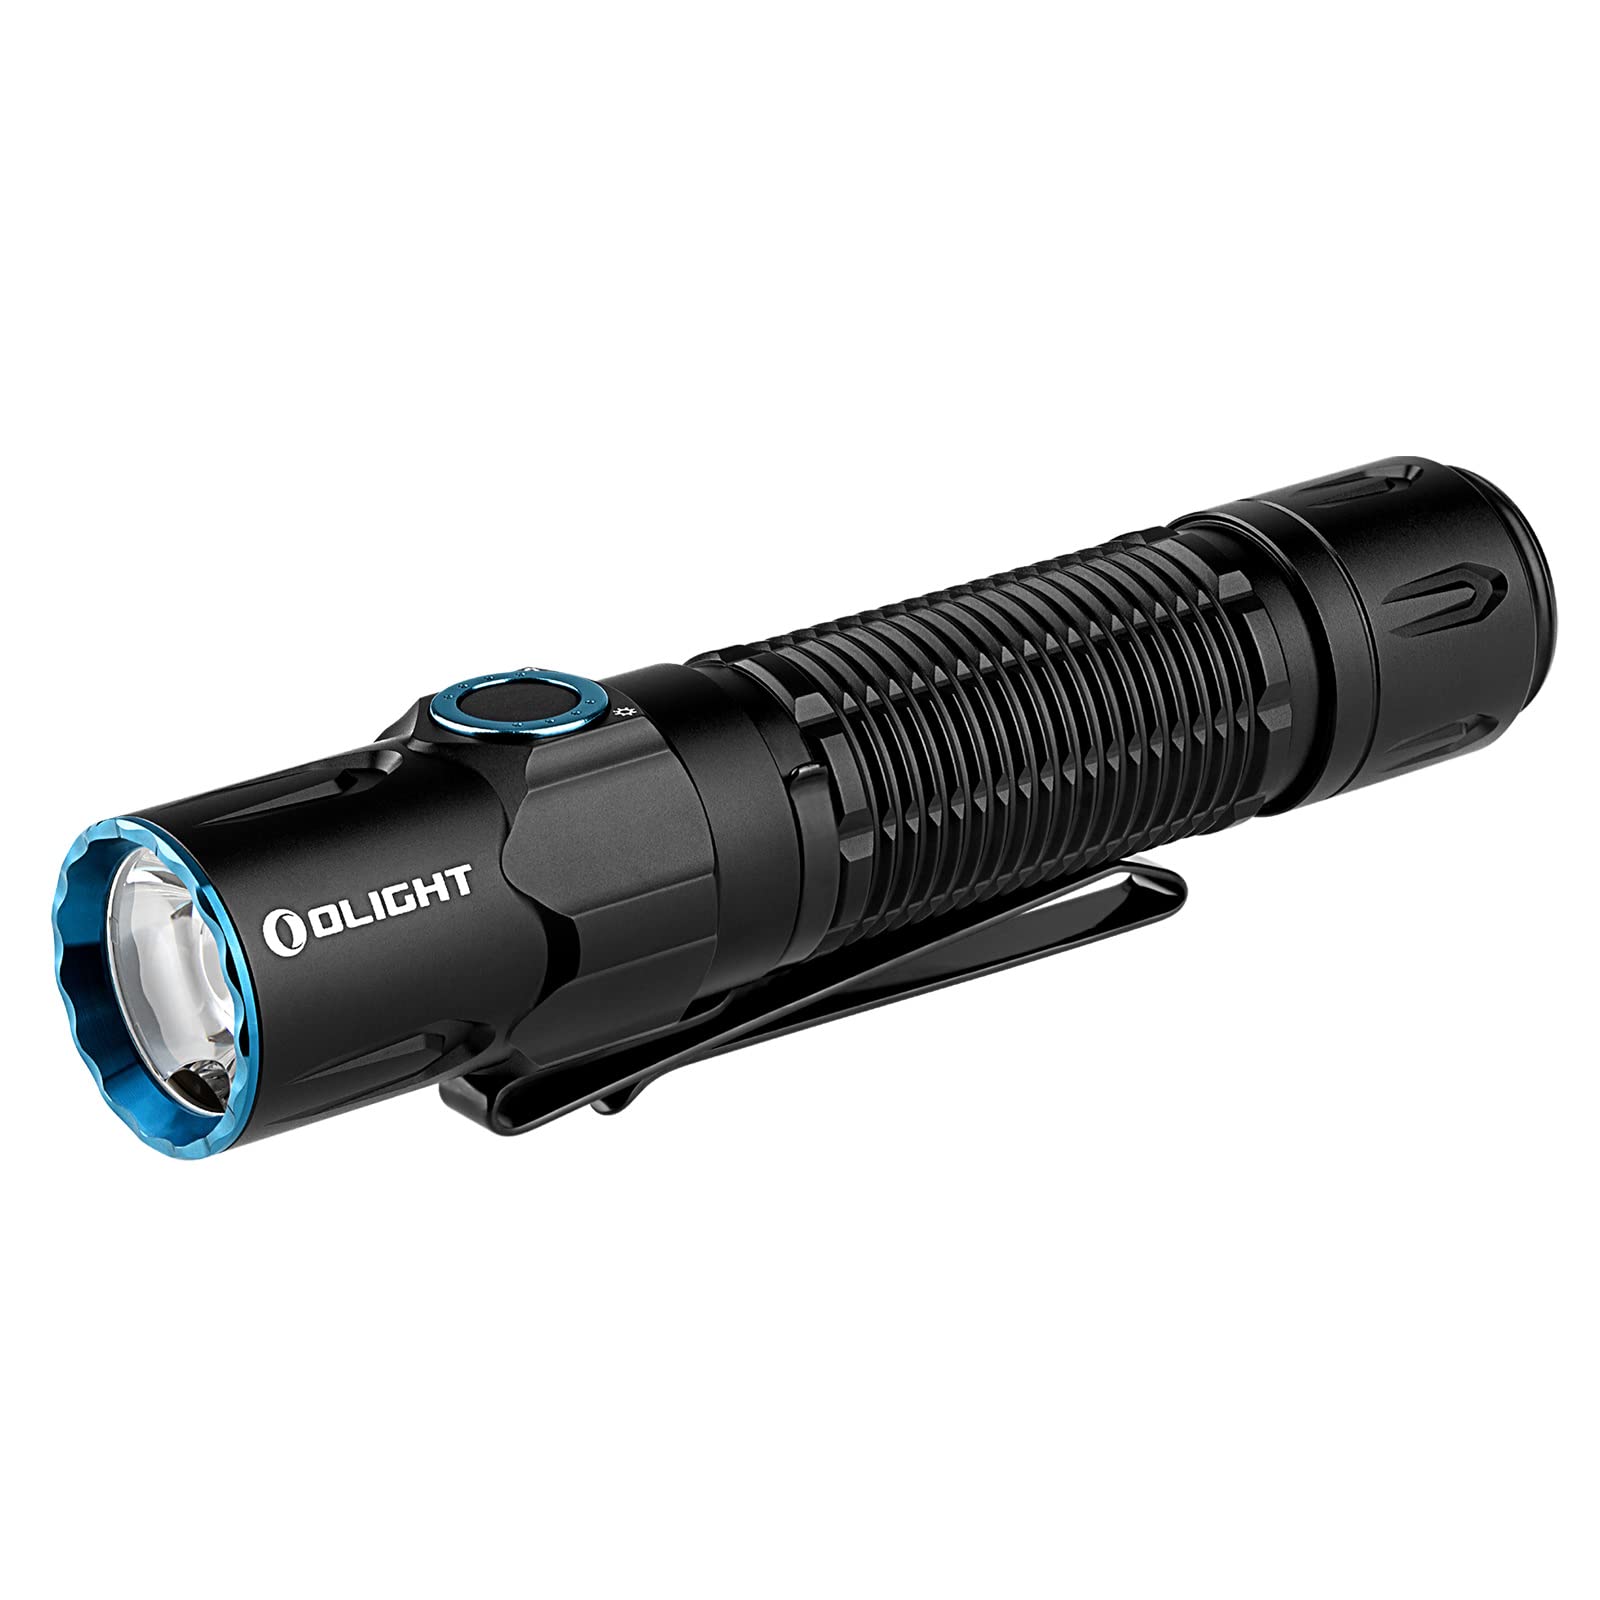 Olight Warrior 3S 2300 Lumens Rechargeable Tactical Flashlight, Compact Dual-Switches LED Bright Light with Proximity Sensor, Powered by Customized Battery for Emergency, EDC and Searching